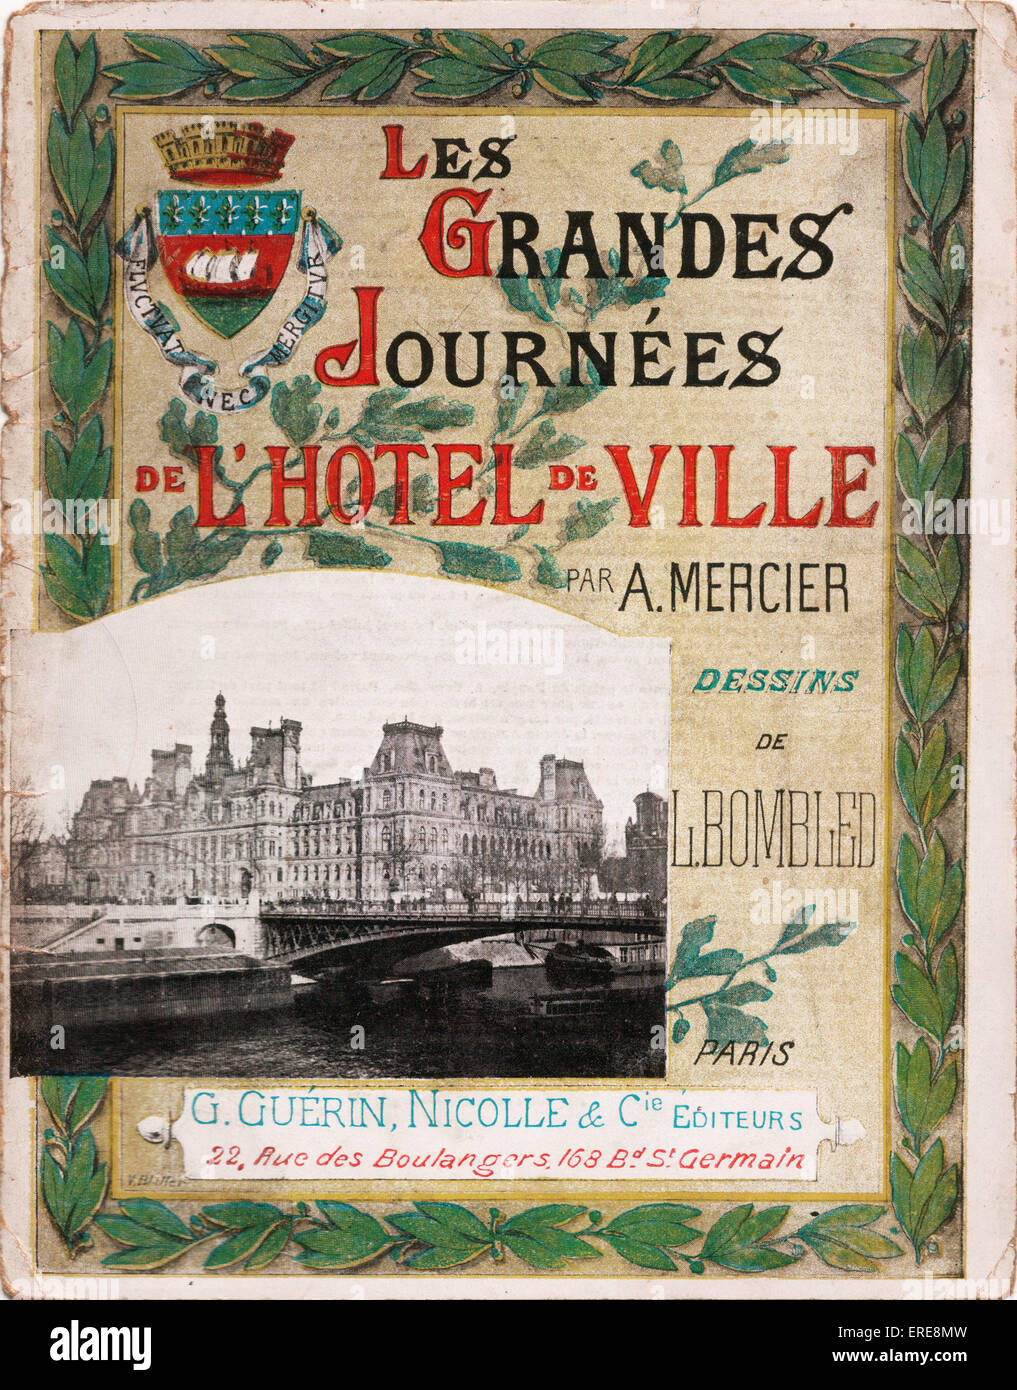 Hôtel de Ville publication, Paris, 1889. Cover of booklet about the history of the Paris Town Hall with a photograph of the Stock Photo